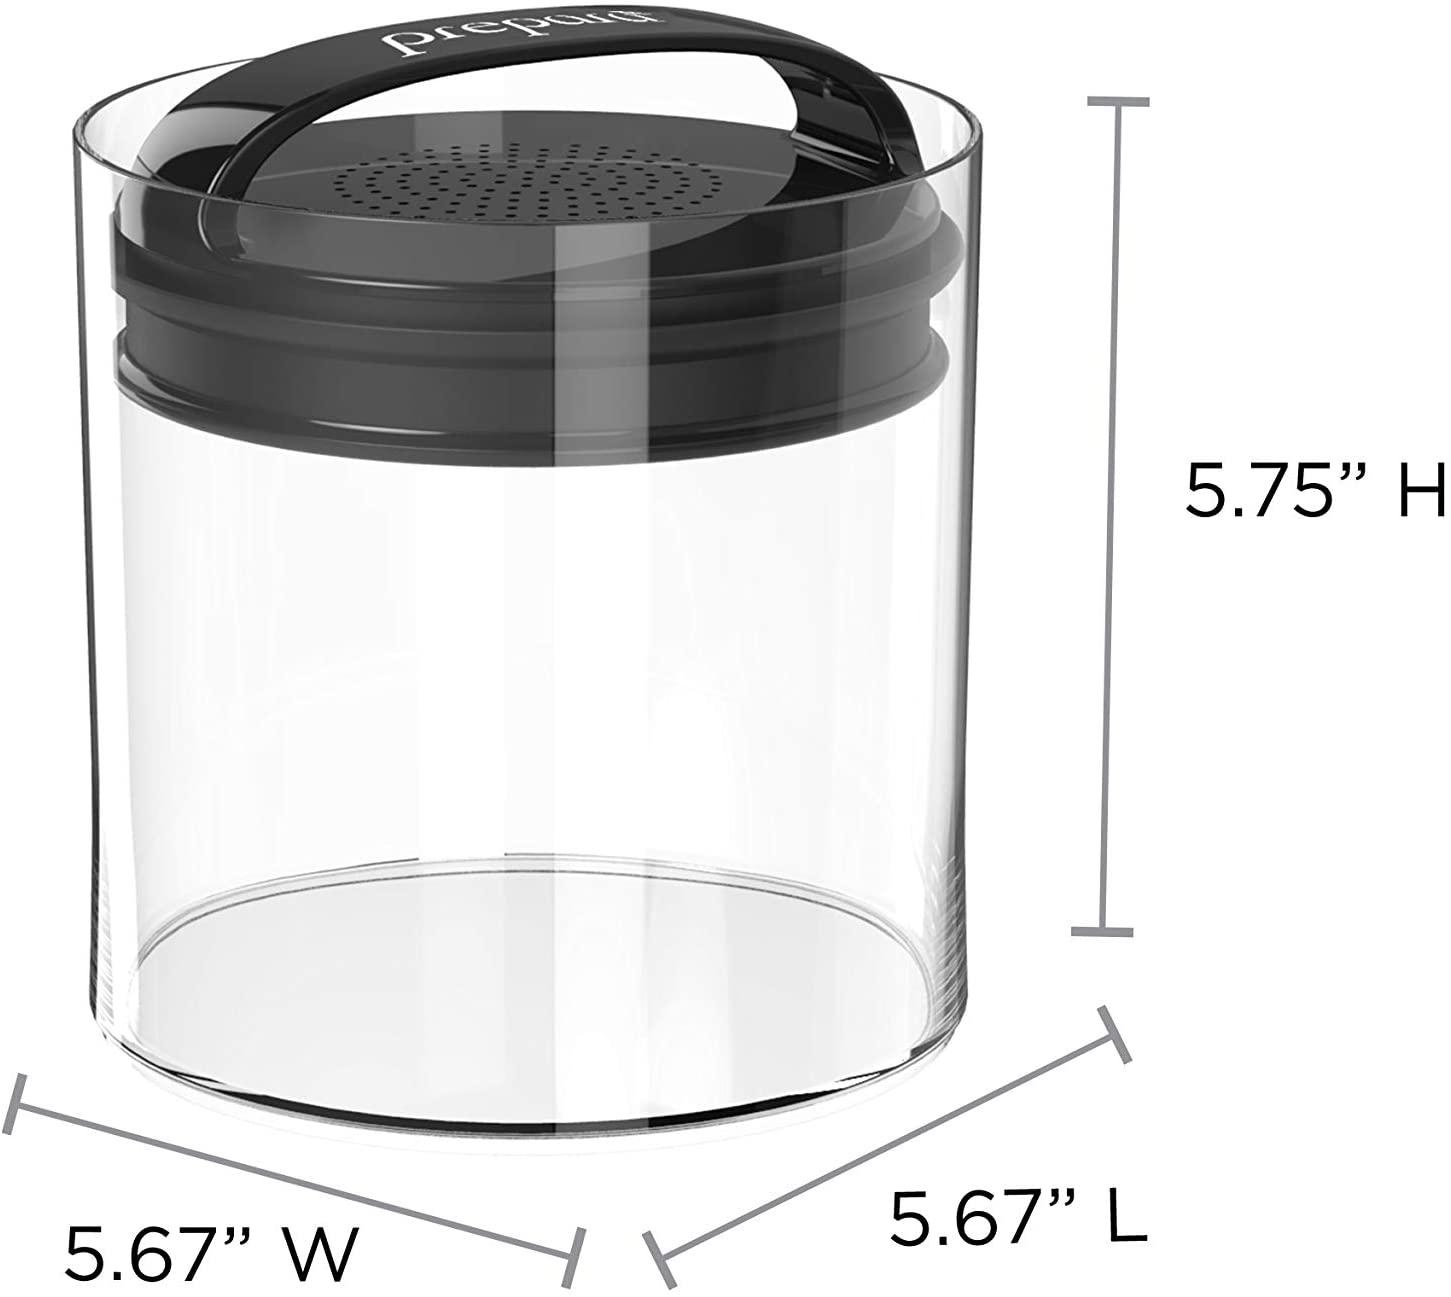 Prepara Evak Compact 0.5 Qt. Clear Glass Round Airtight Food Storage  Container with Push Down Lid 3018